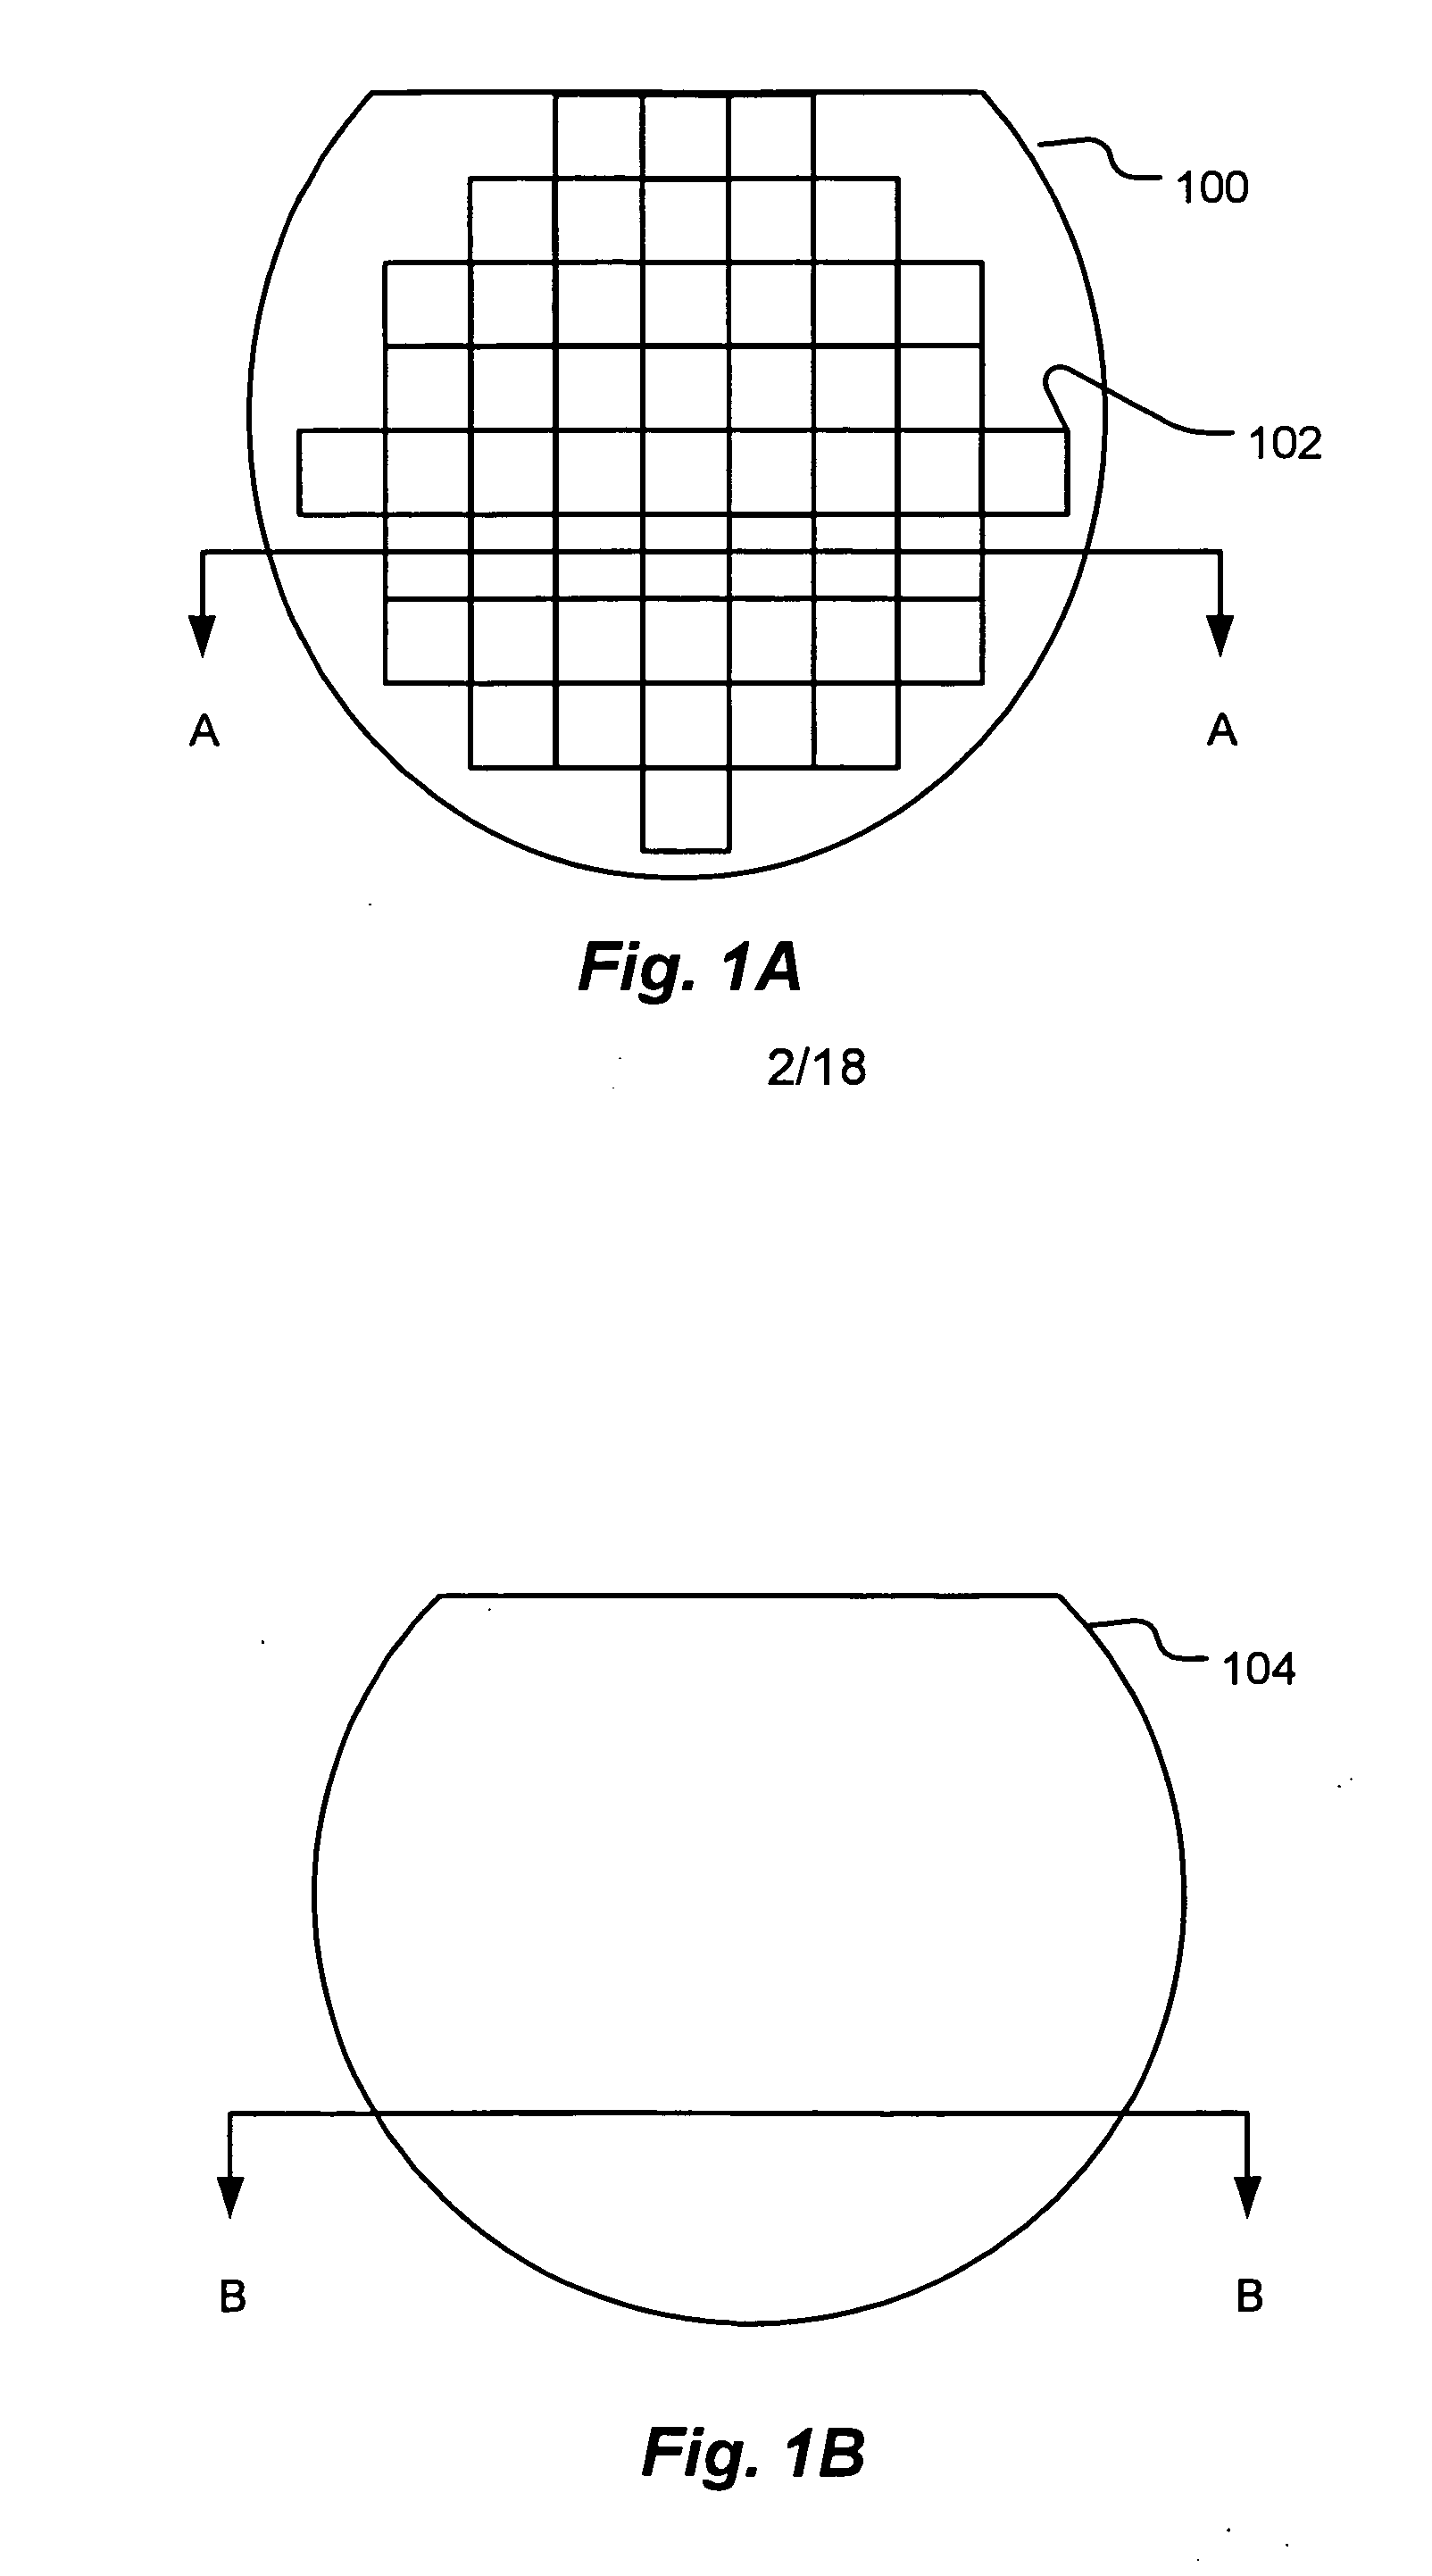 Chip-scale package for integrated circuits